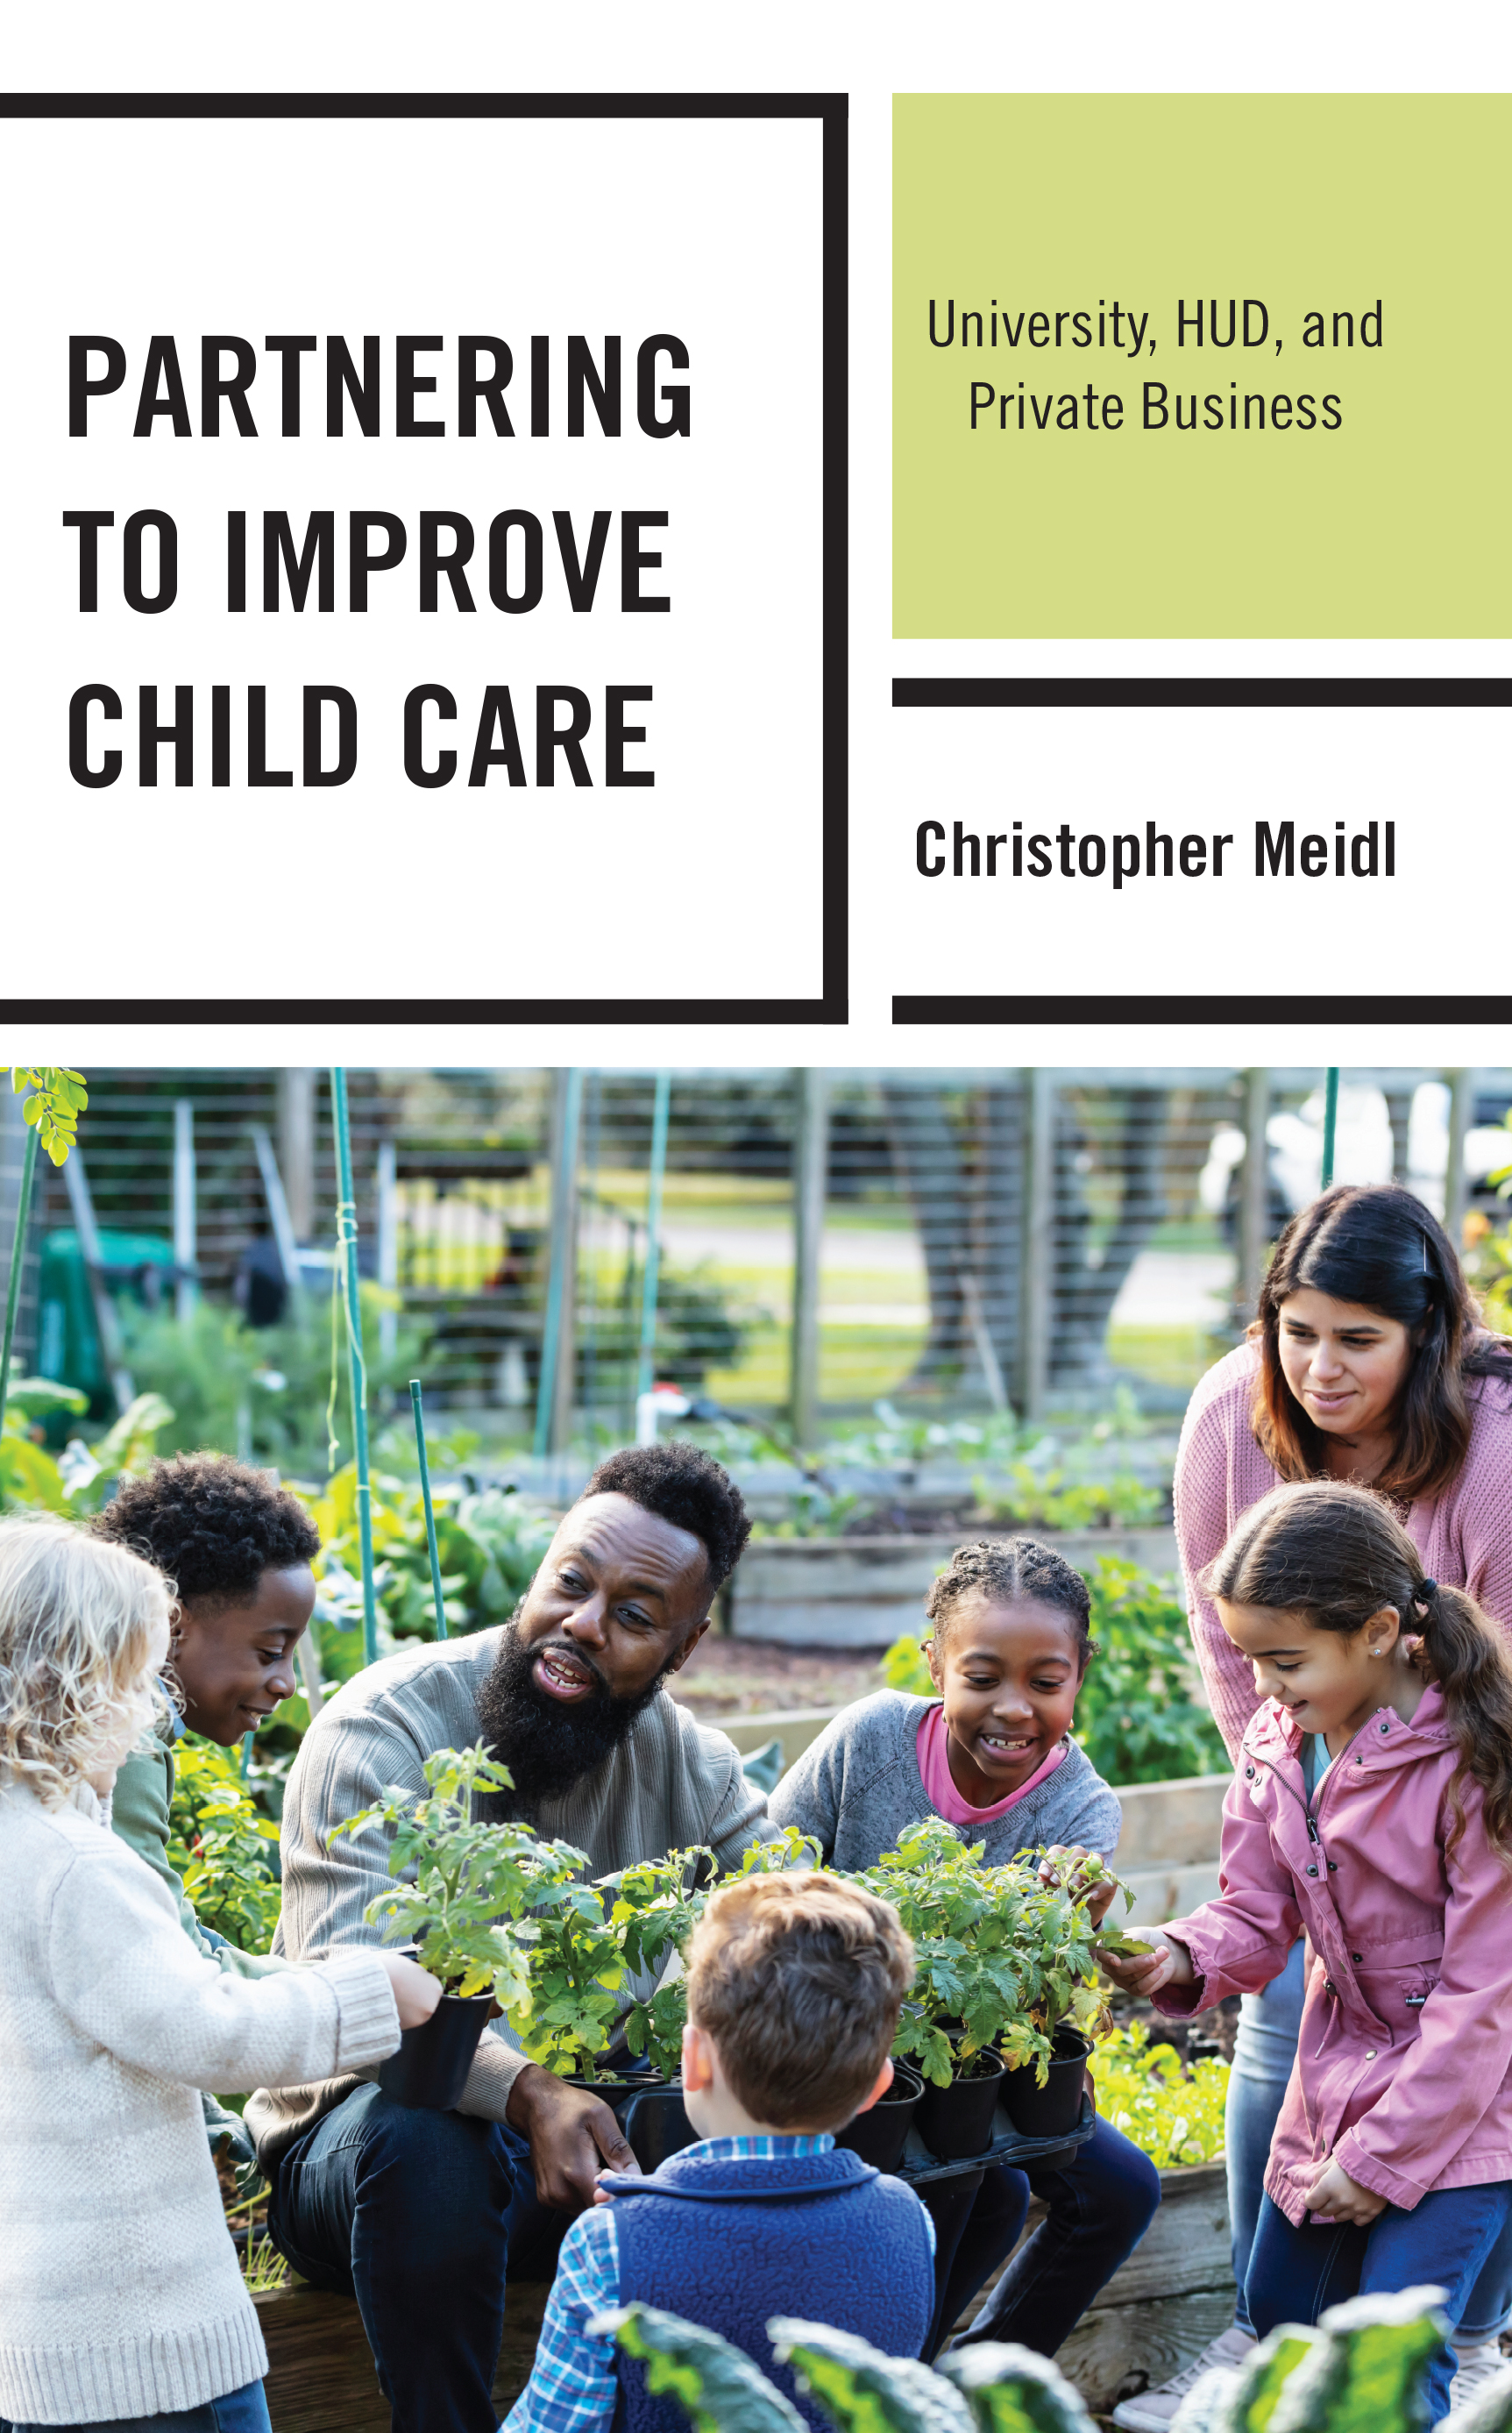 Partnering to Improve Child Care: University, HUD, and Private Business